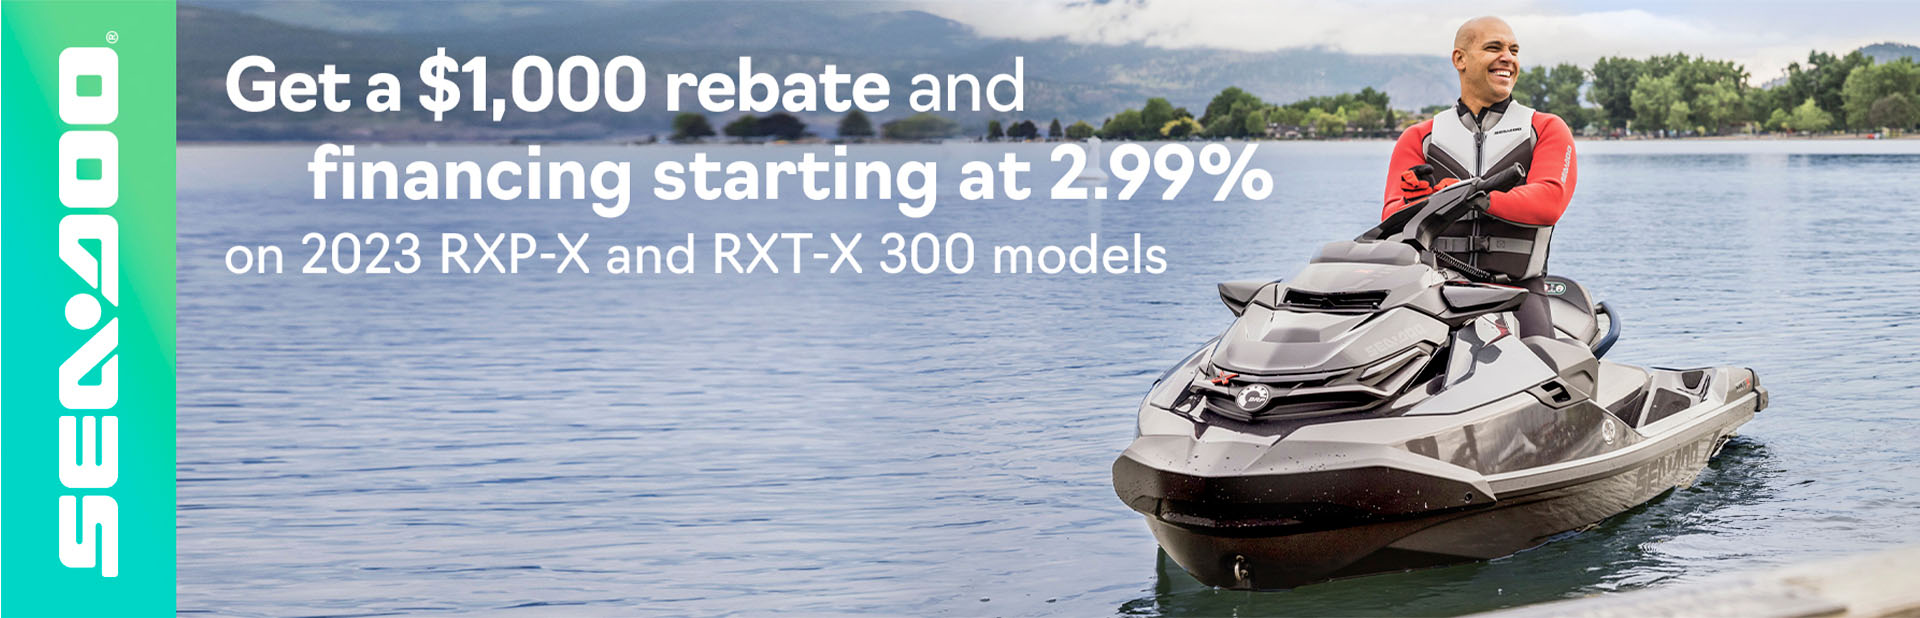 Get a $1,000 rebate and financing starting at 2.99%